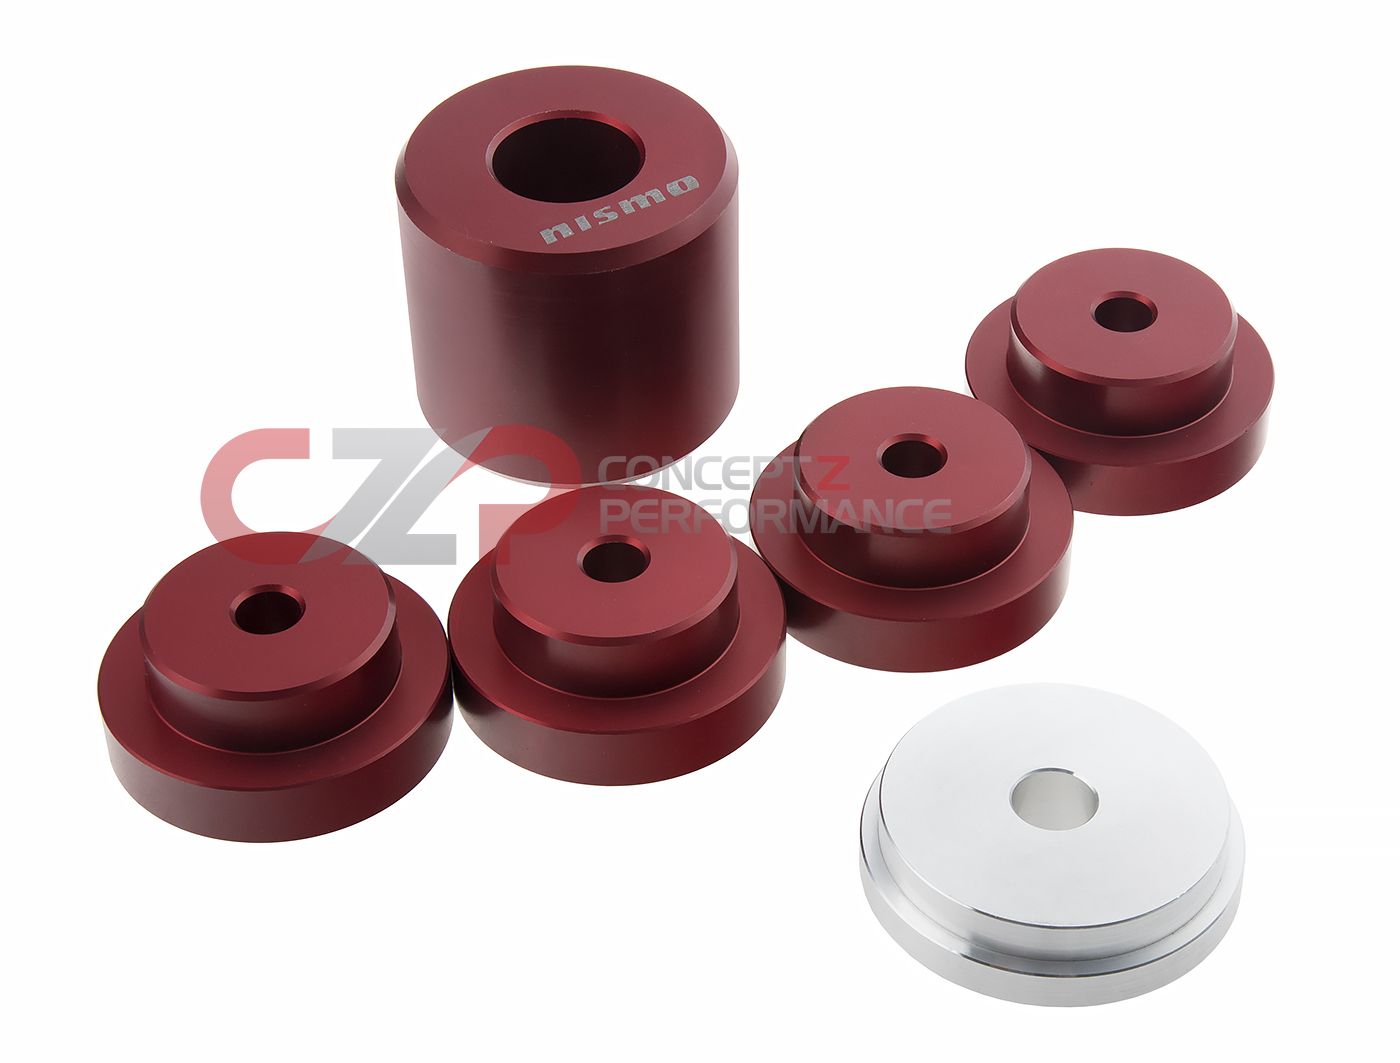 Nismo Solid Differential Bushing Set - Nissan 370Z / Infiniti G37